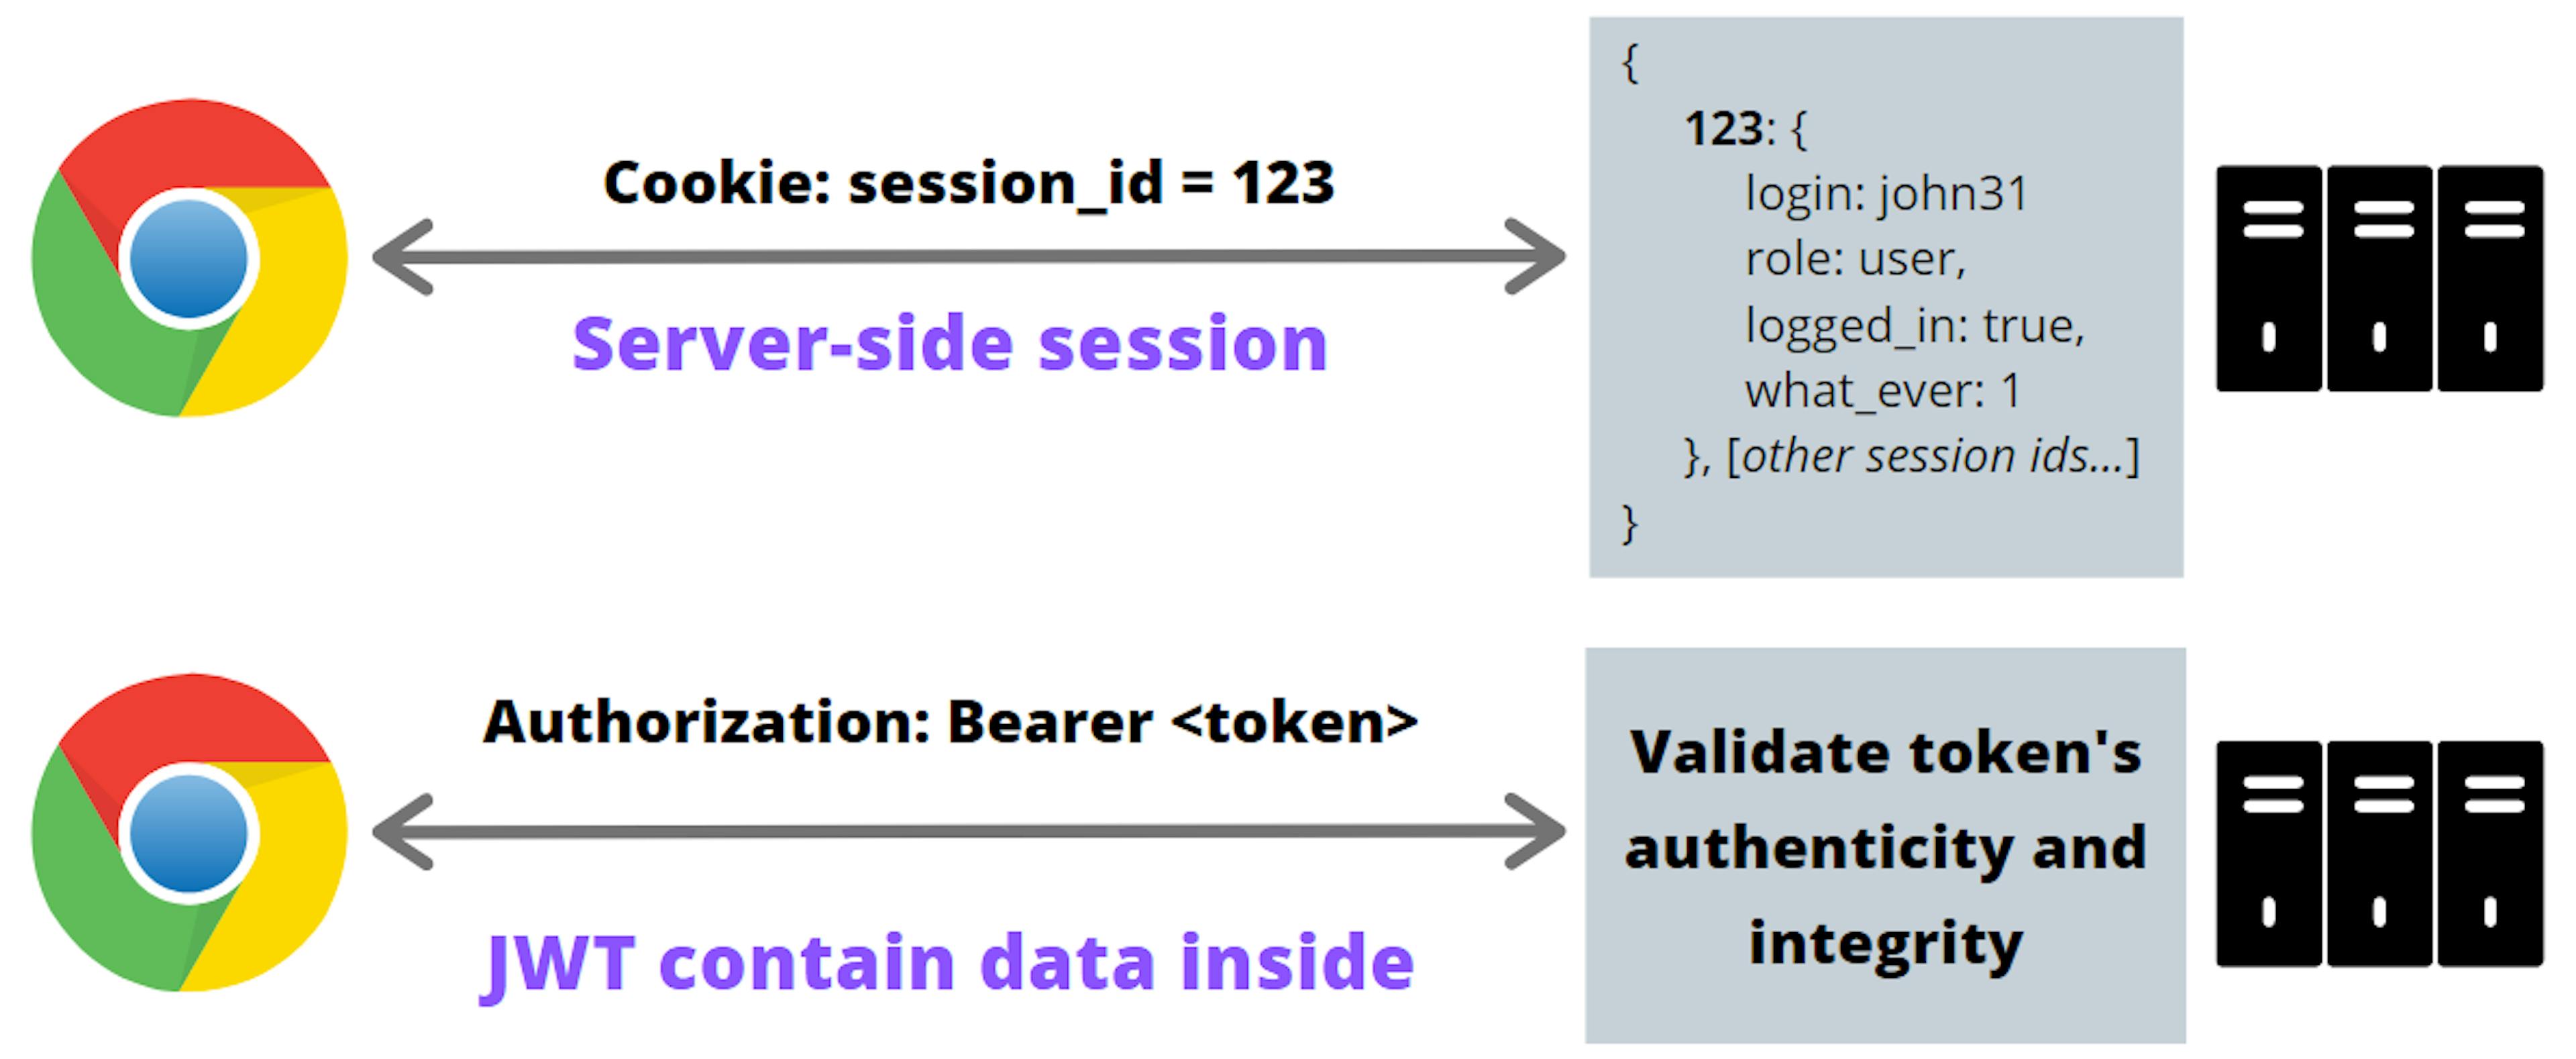 Session cookie vs. Token